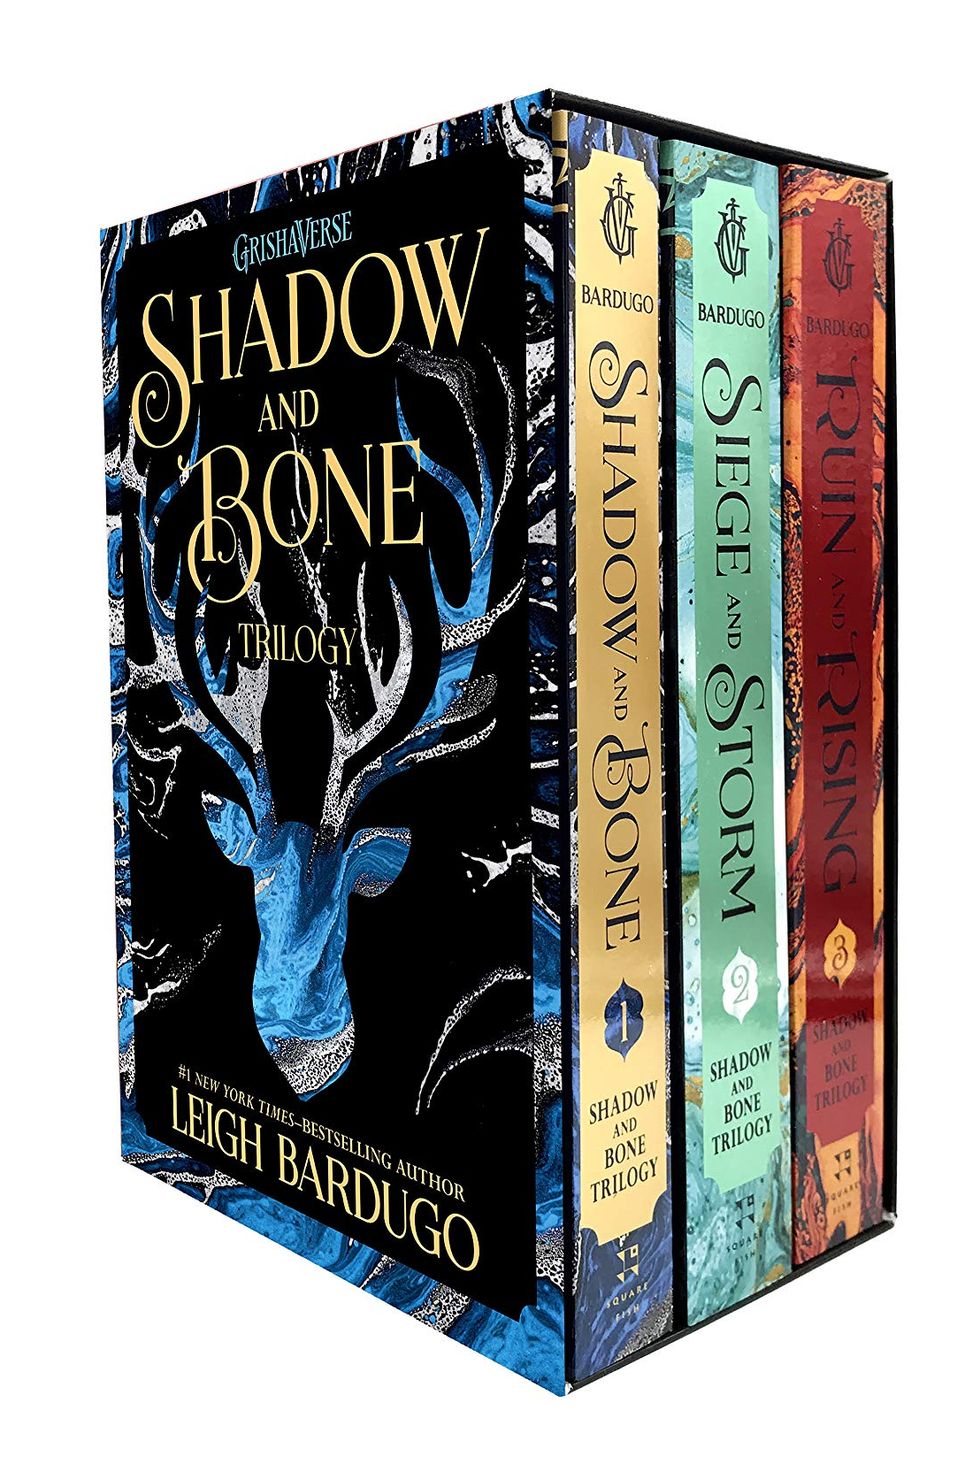 The Shadow and Bone Trilogy Boxed Set by Leigh Bardugo